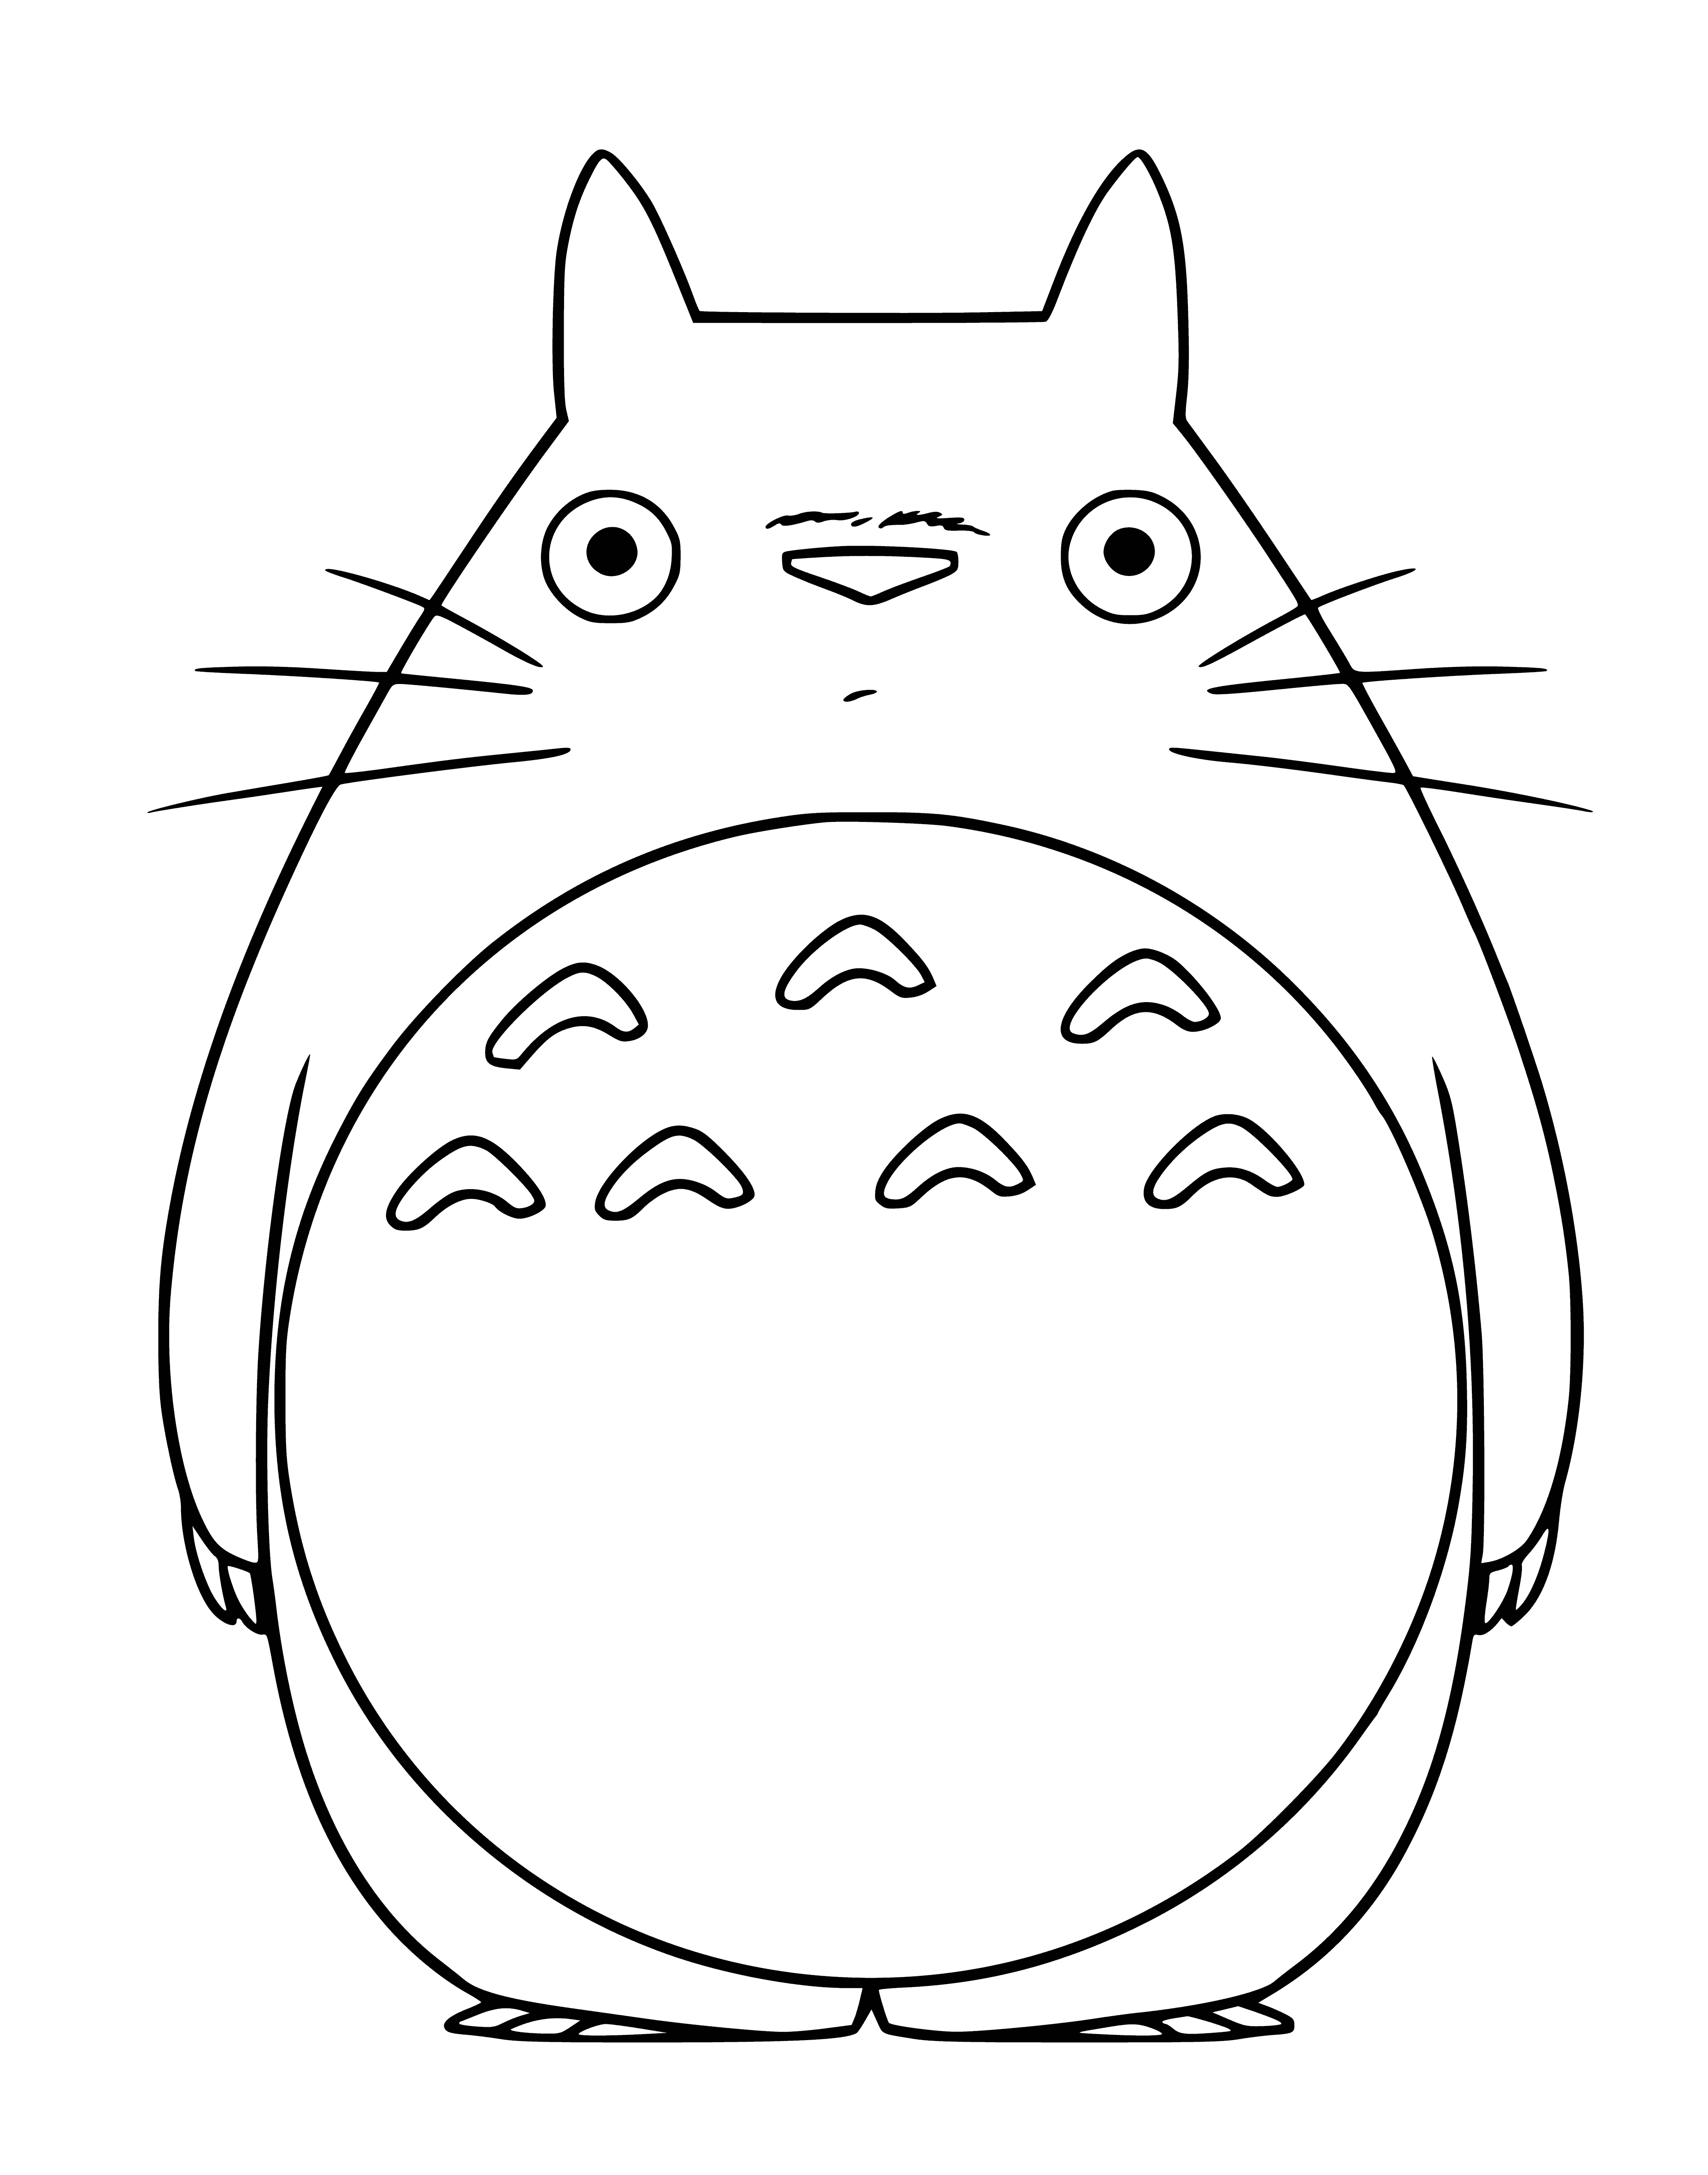 Totoro coloring page